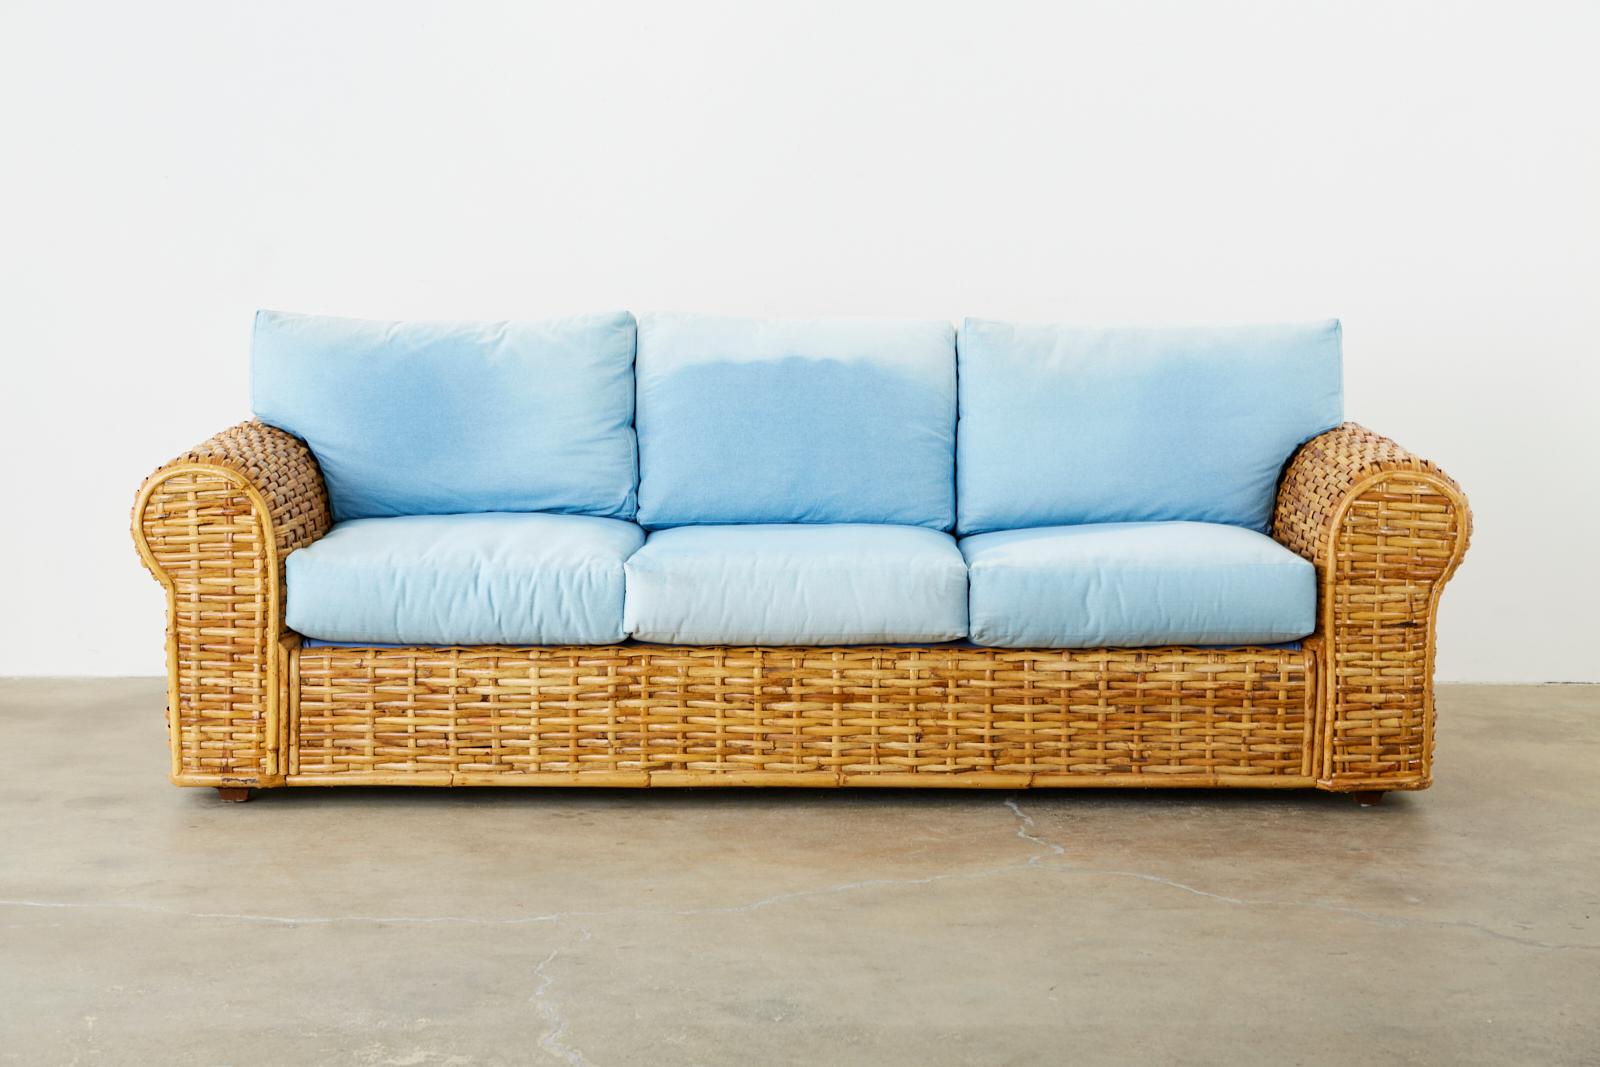 Grand sofa by Ralph Lauren Polo collection constructed from woven bamboo rattan reeds. Features a faded blue soft denim type cotton upholstery that has lovely age and ombre color. Made in the organic modern style late 20th century. Beautiful profile